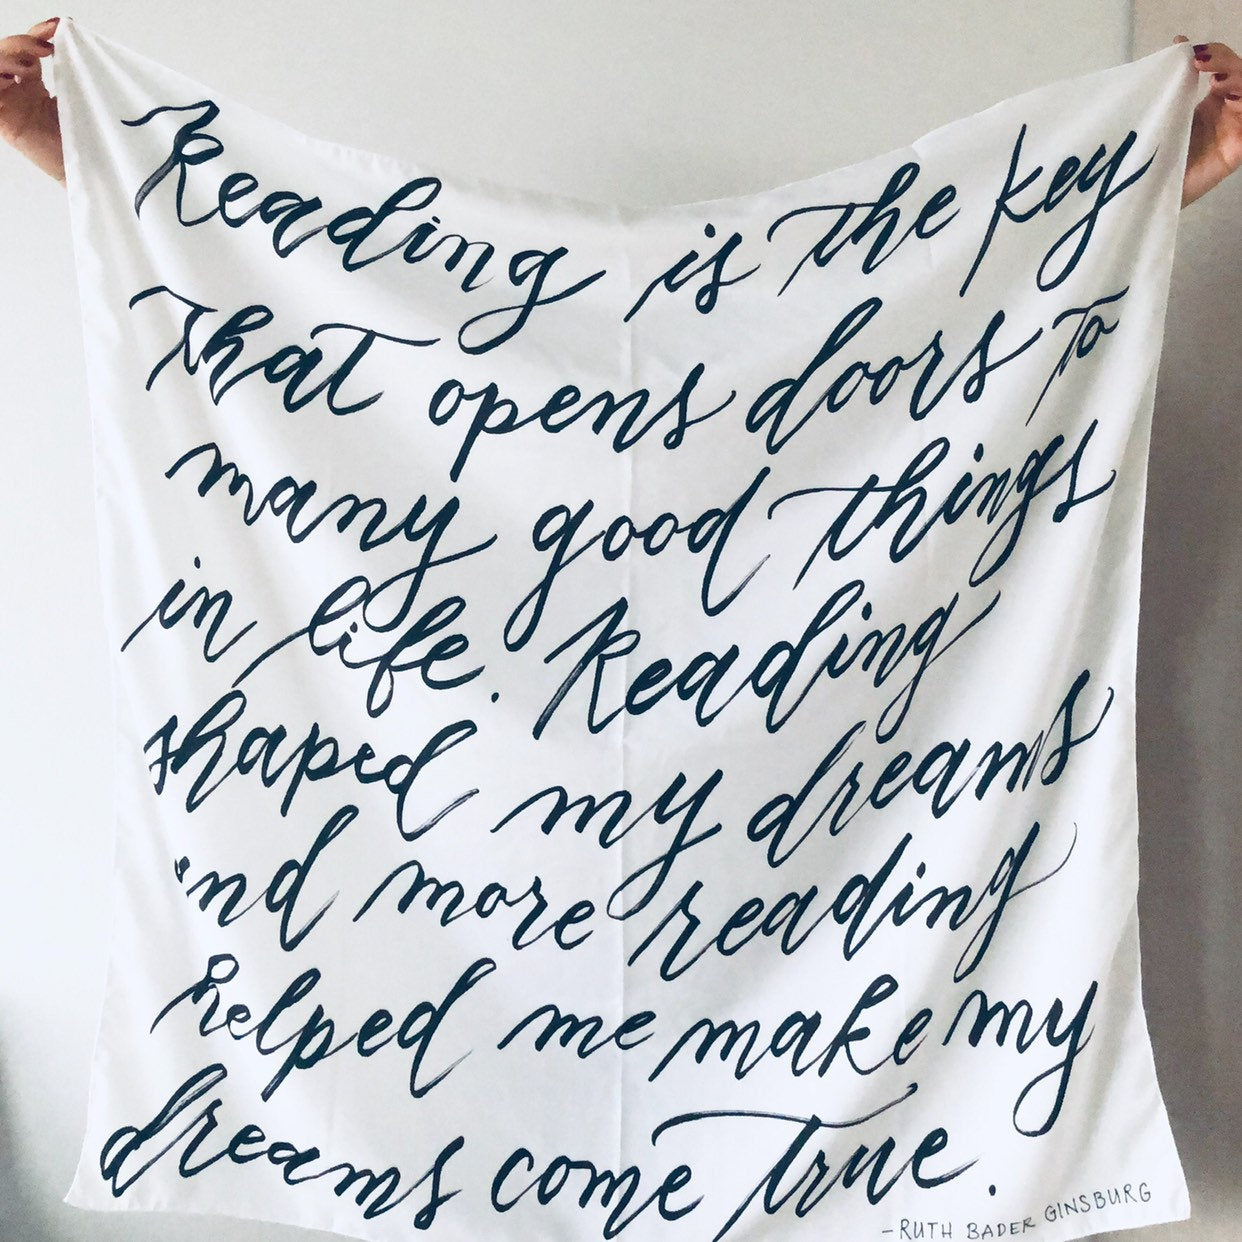 Gift for Readers or Teachers - Scarf with Reading Quote by Ruth Bader Ginsburg (RBG)